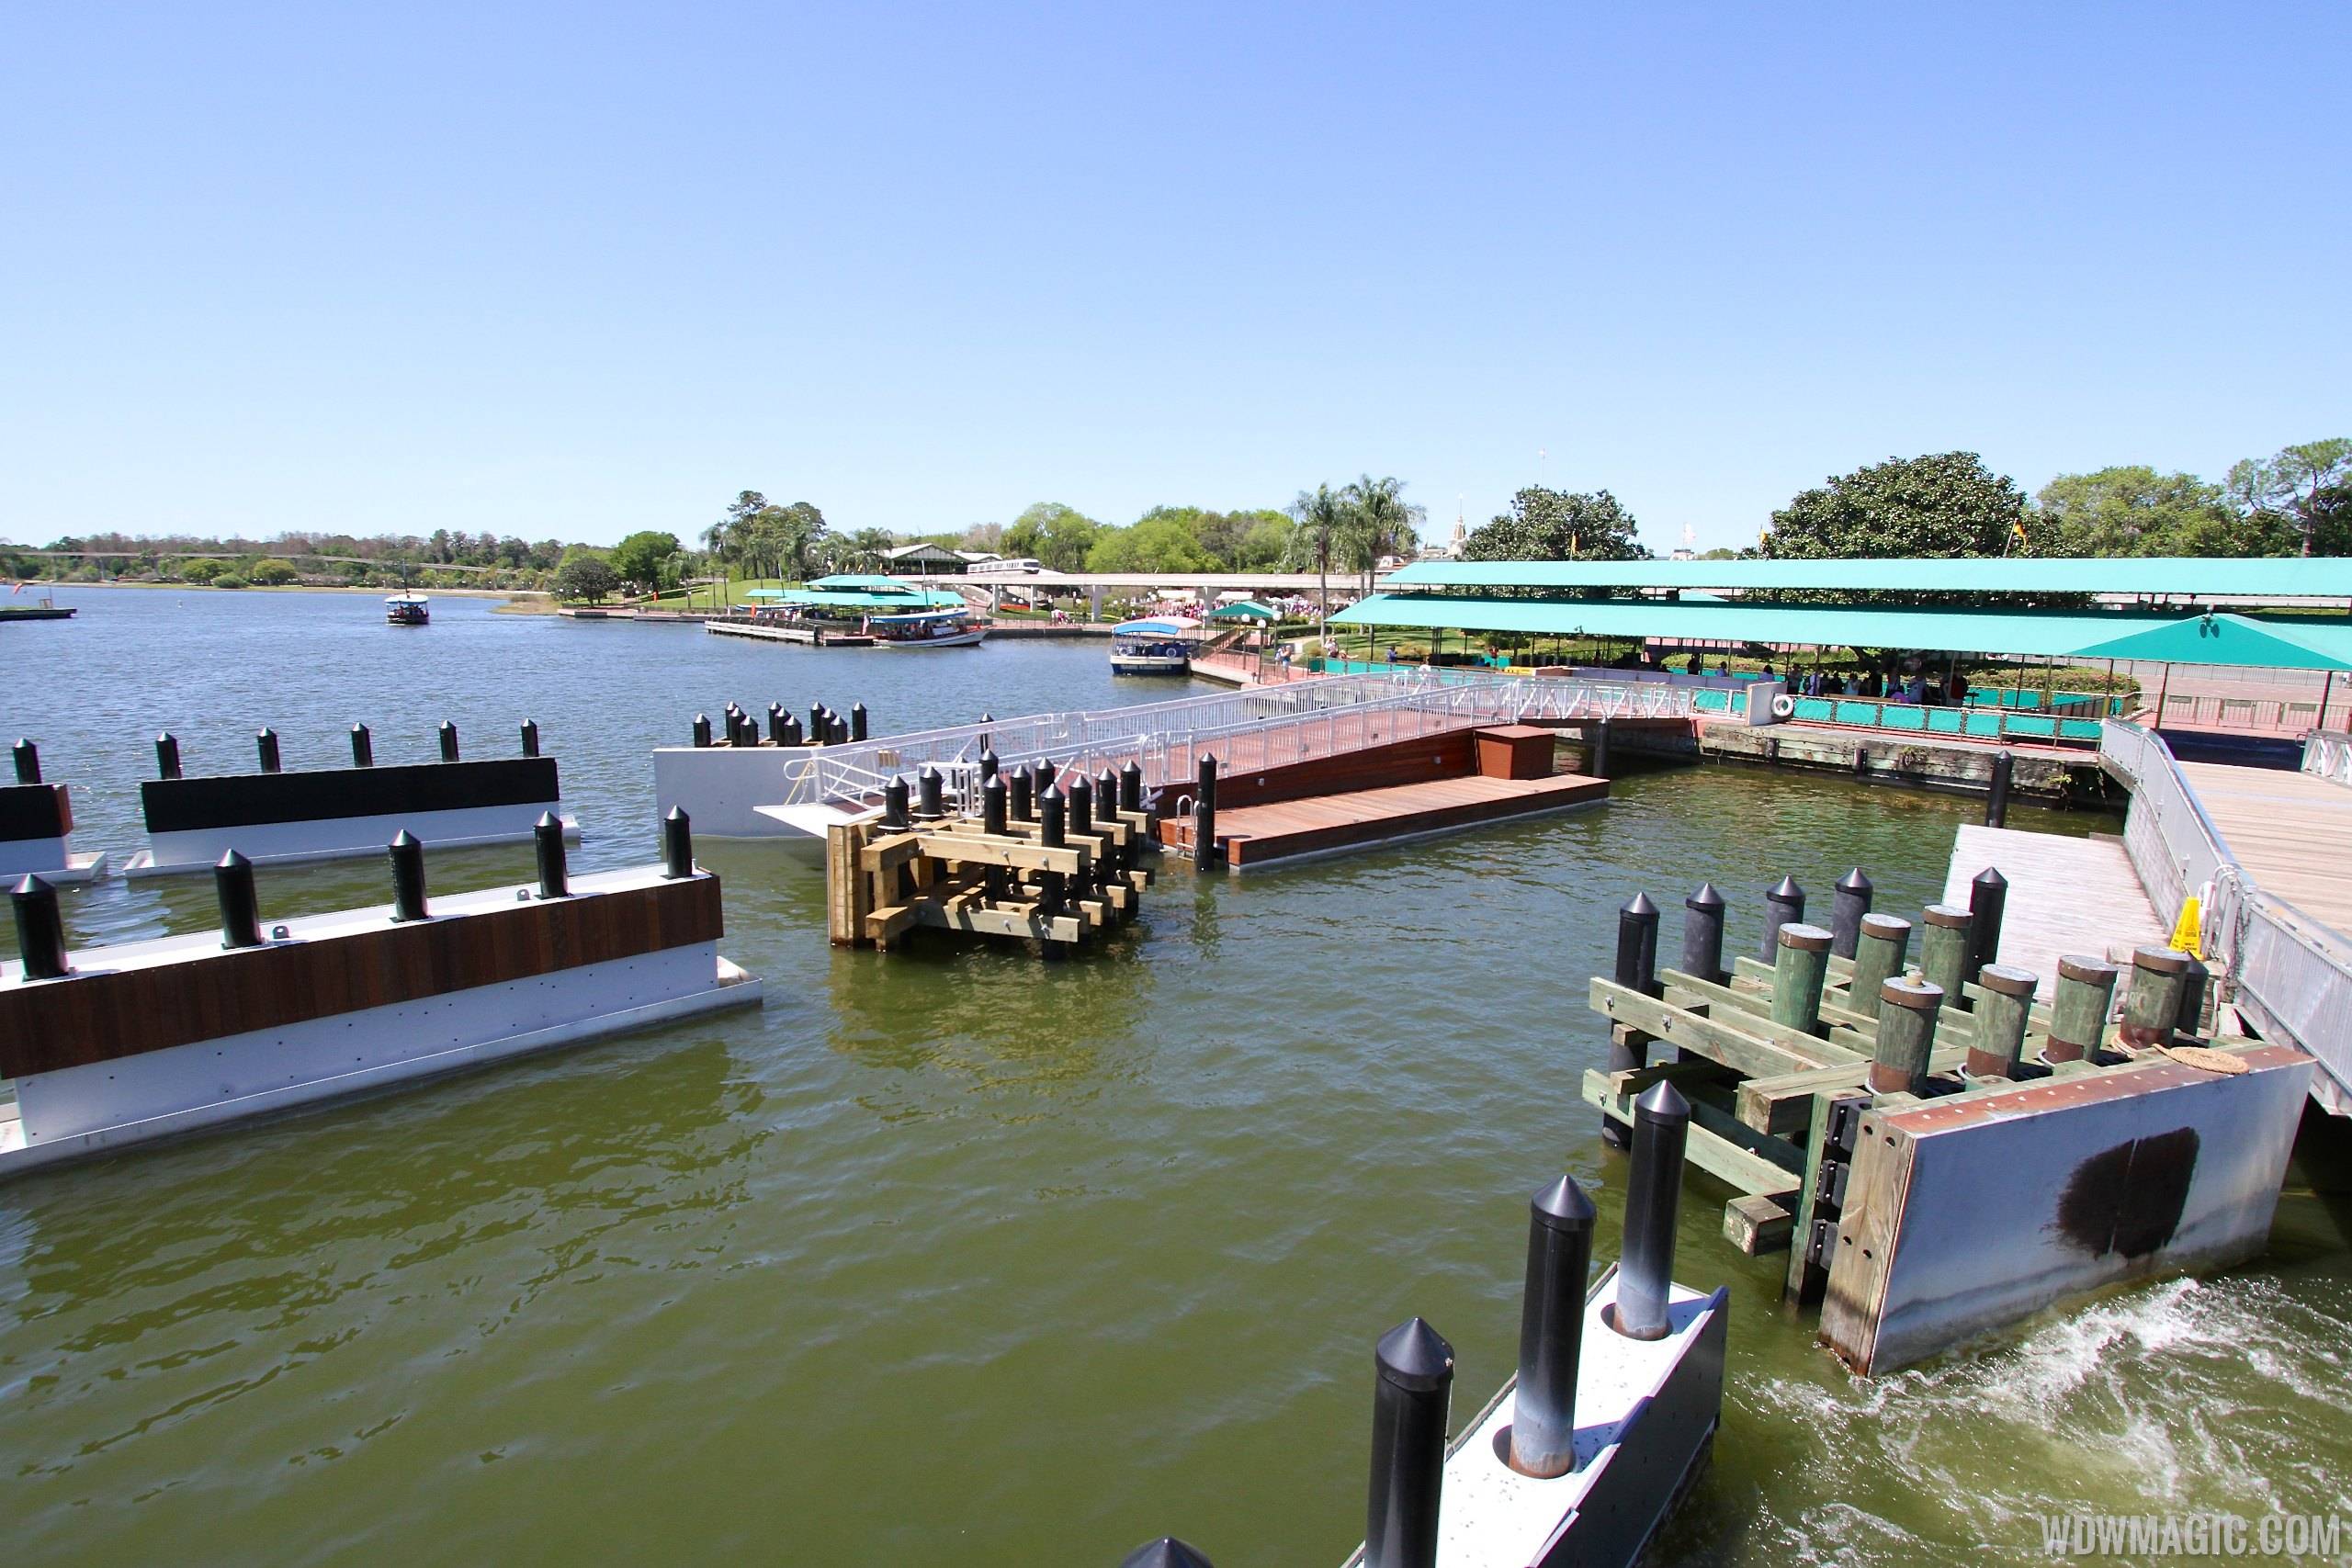 Completed second ferry boat docks at the Magic Kingdom and TTC